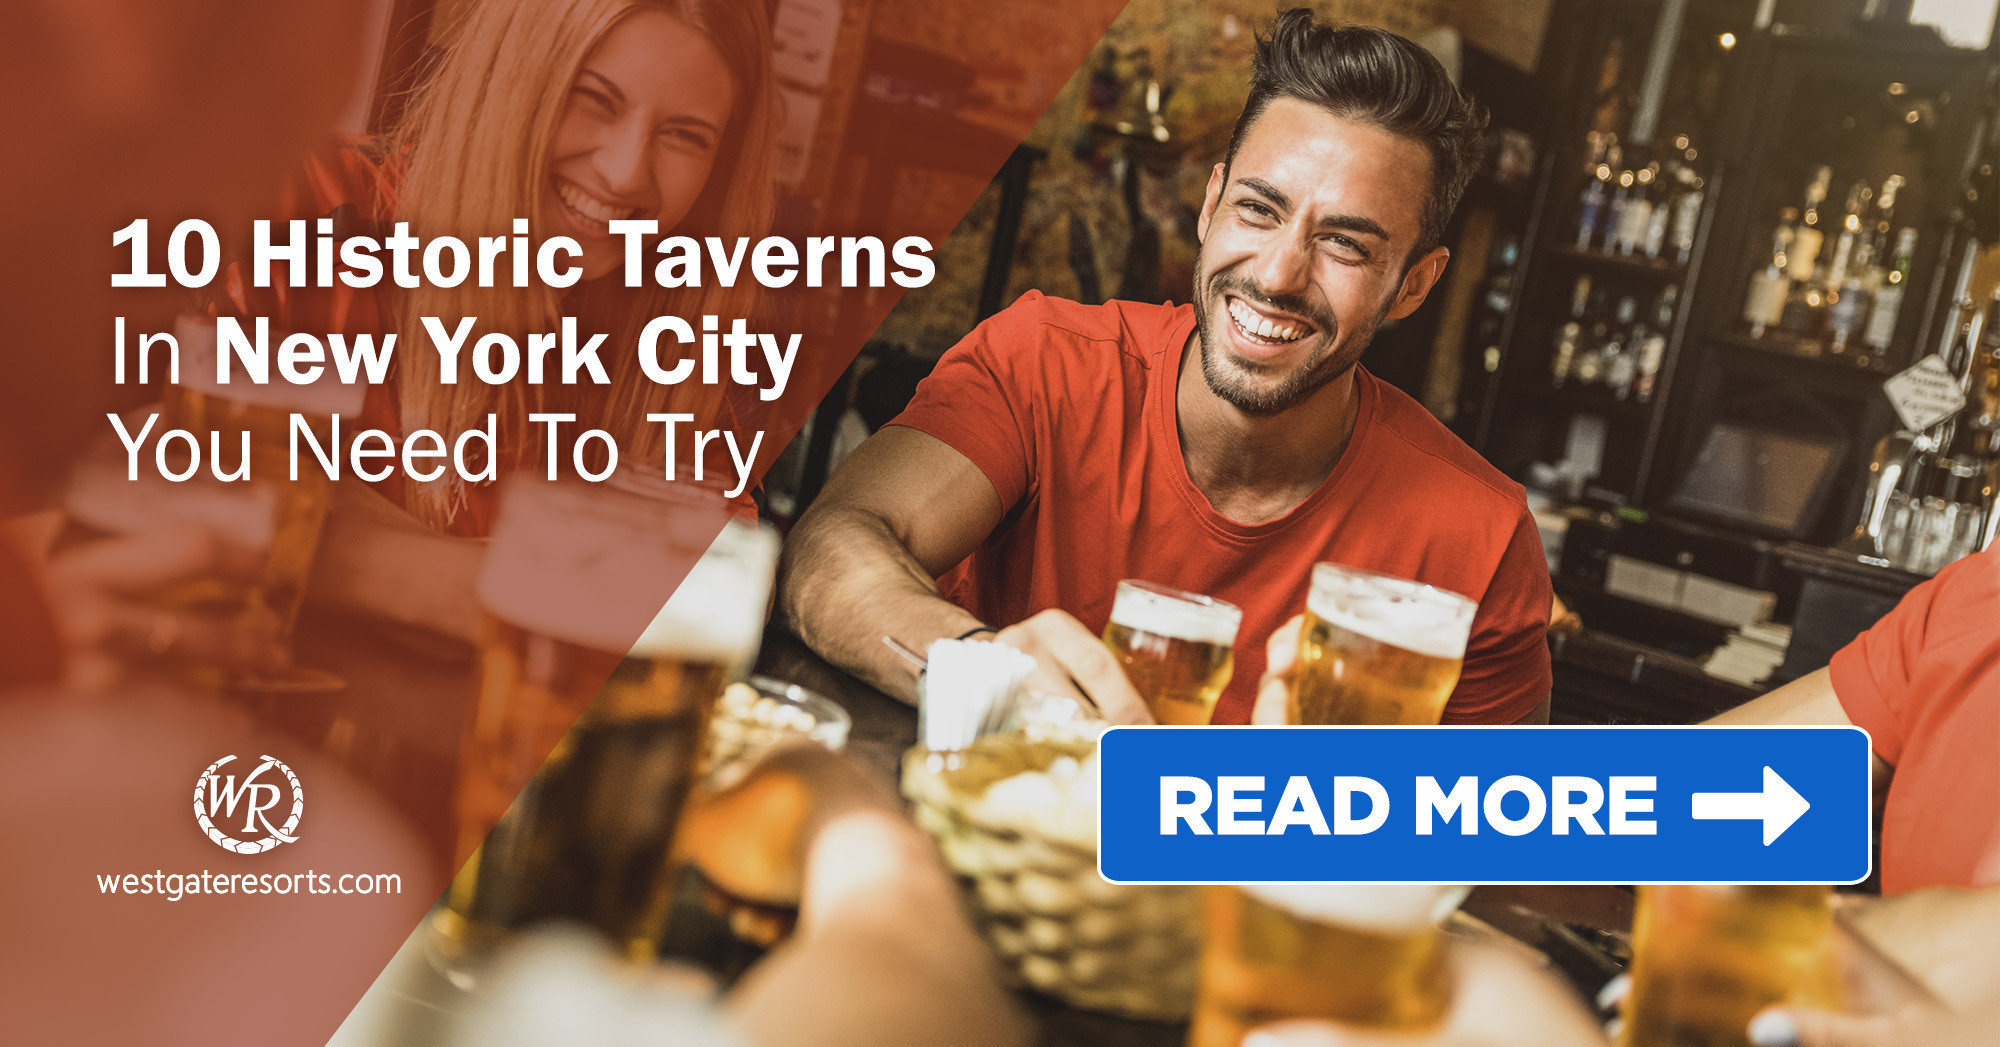 10 Historic Taverns In New York City You Need To Try | The Best Old NYC Taverns